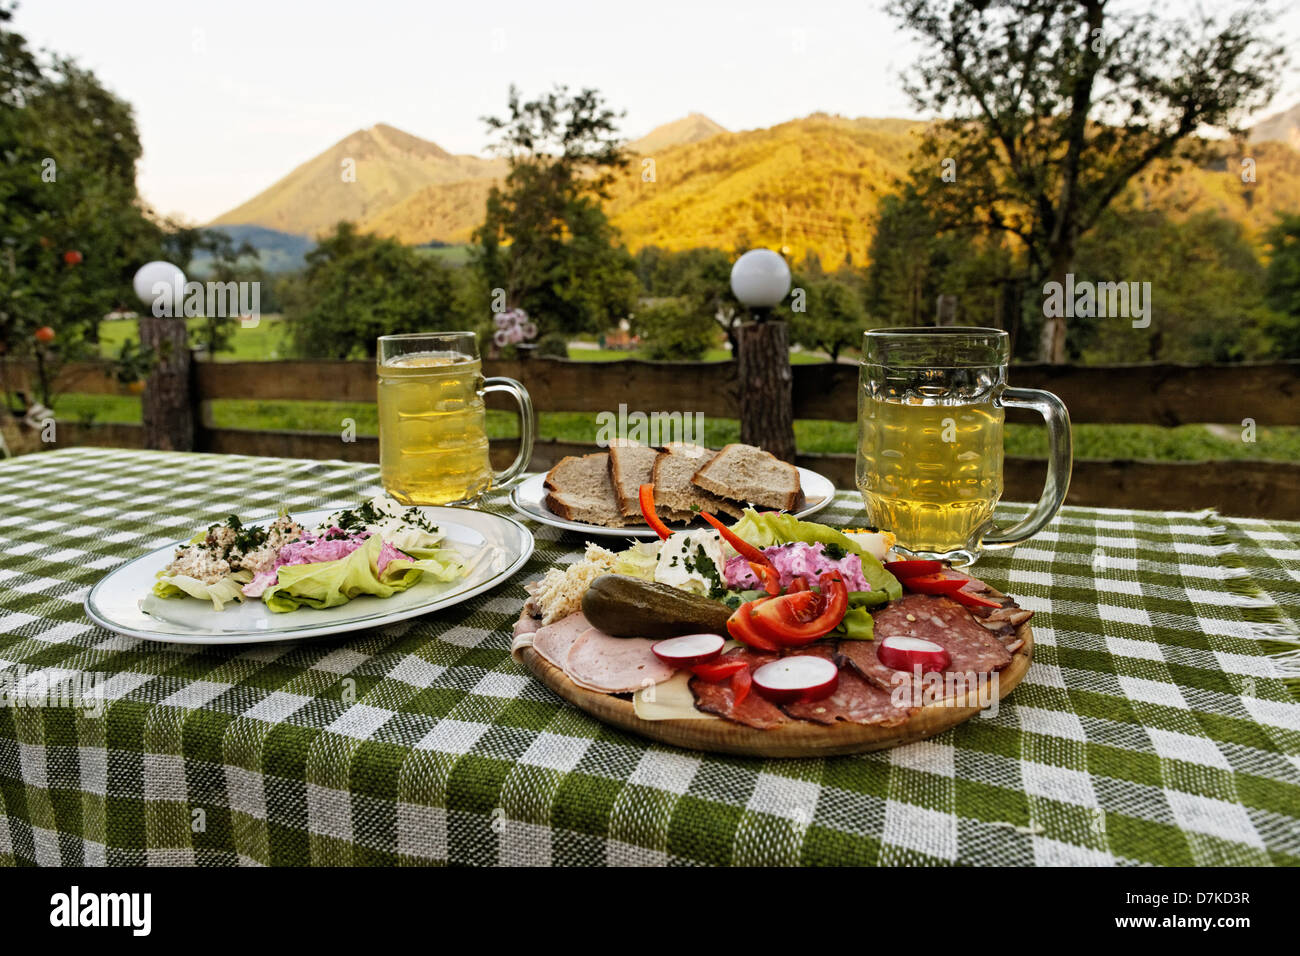 Austria, Upper Austria, Glasses of cider with lunch Stock Photo